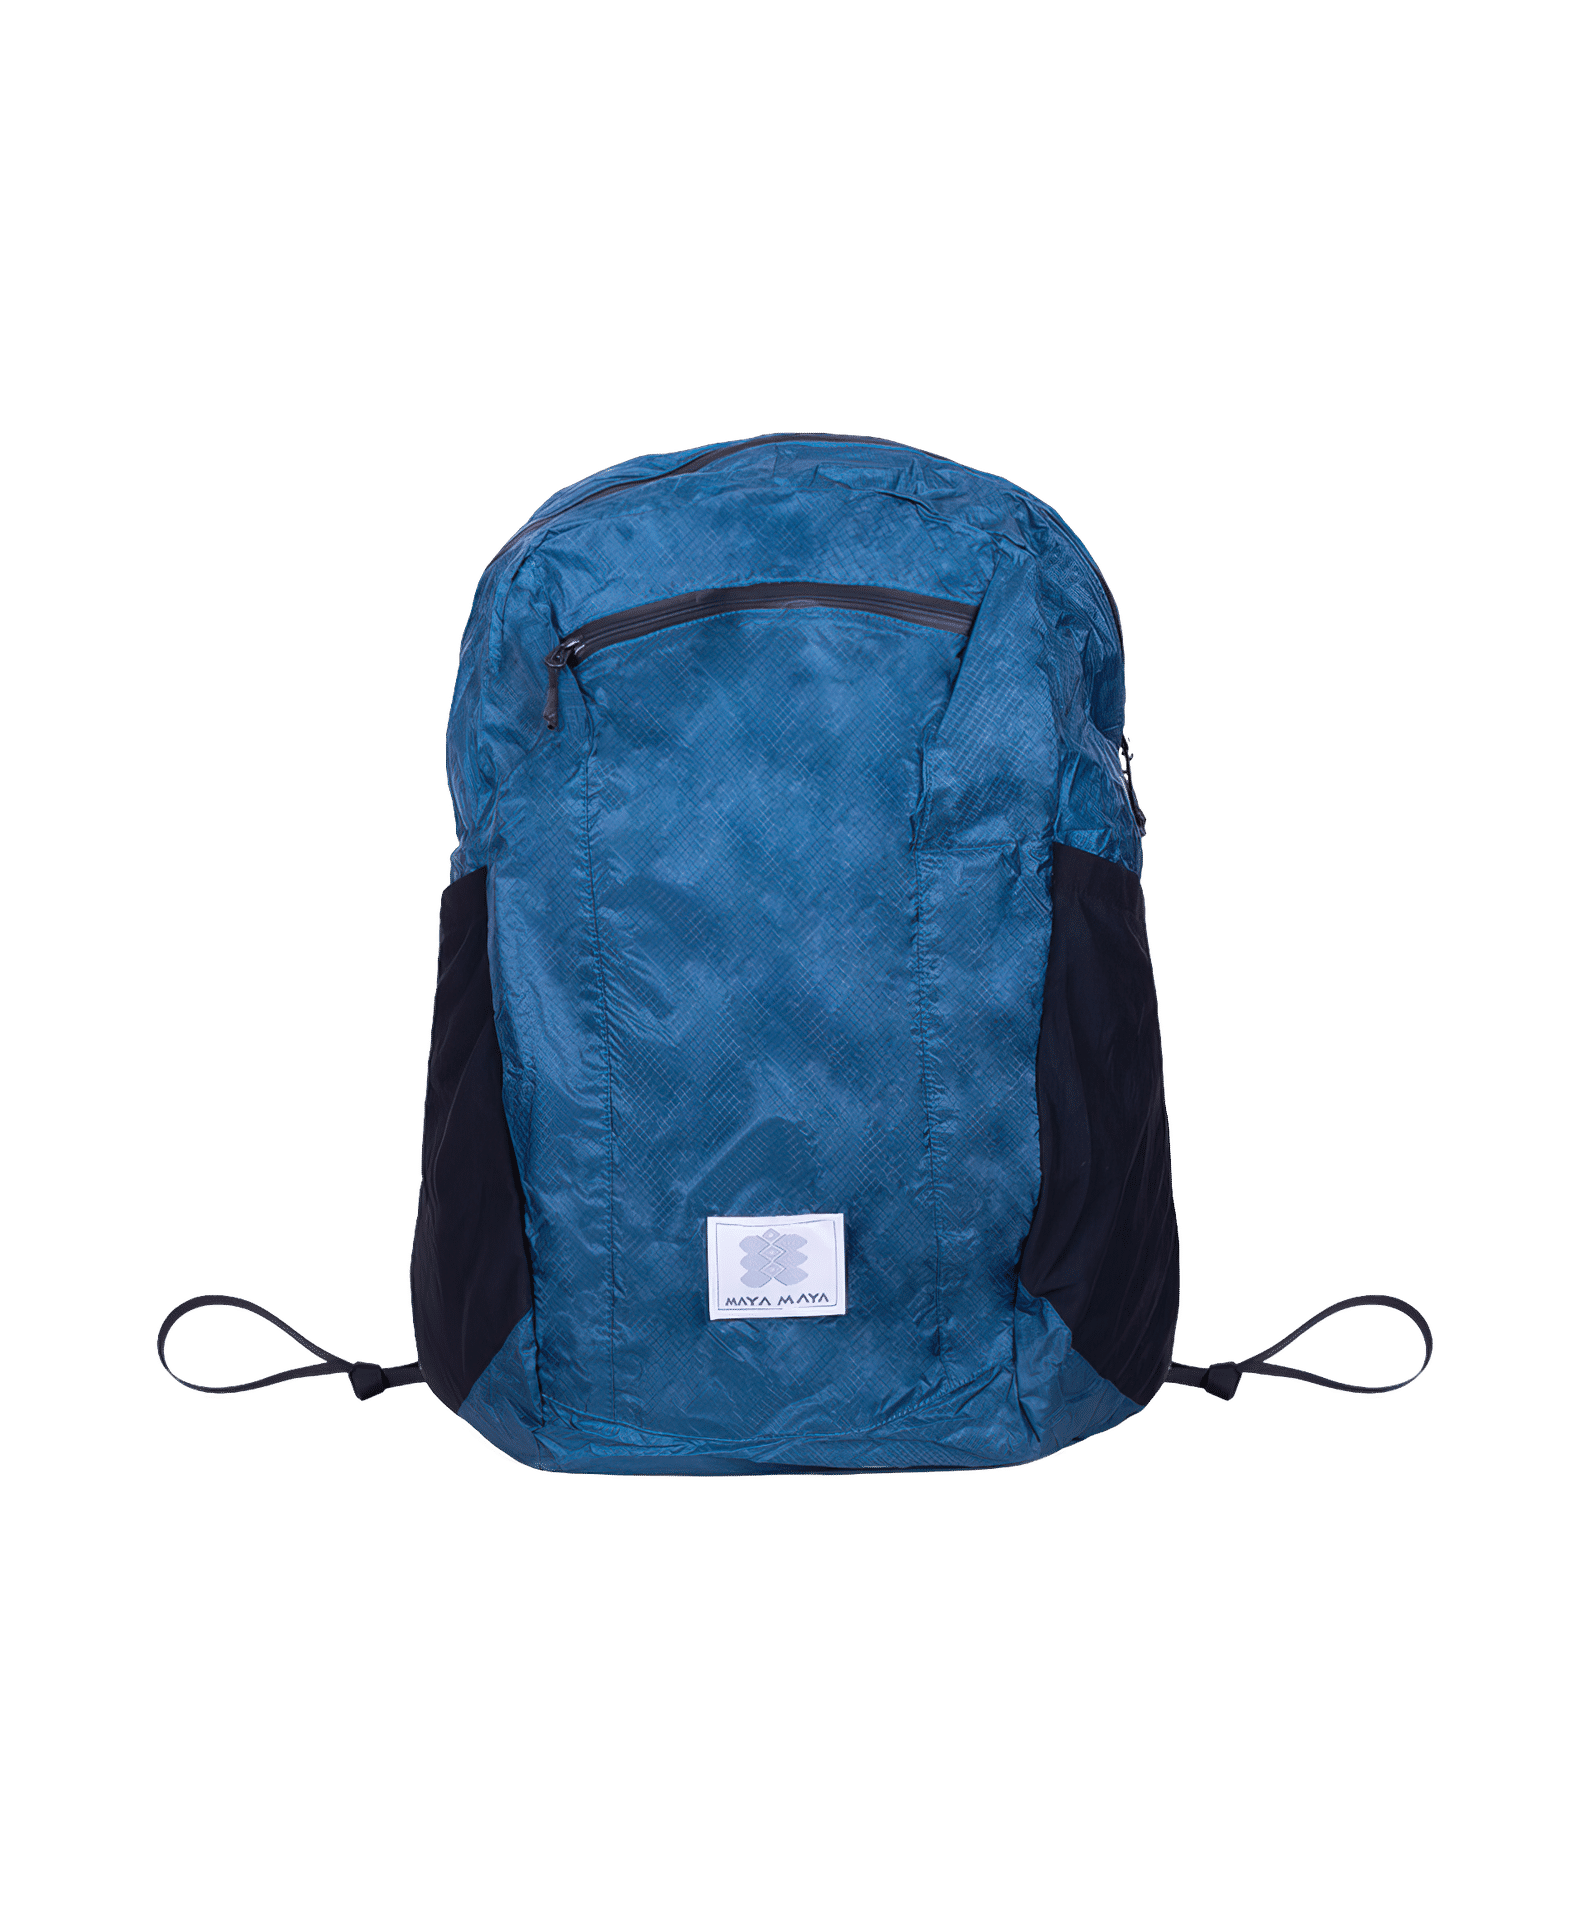 Light packable backpack blue from MAYA MAYA for hiking and other outdoor activities.